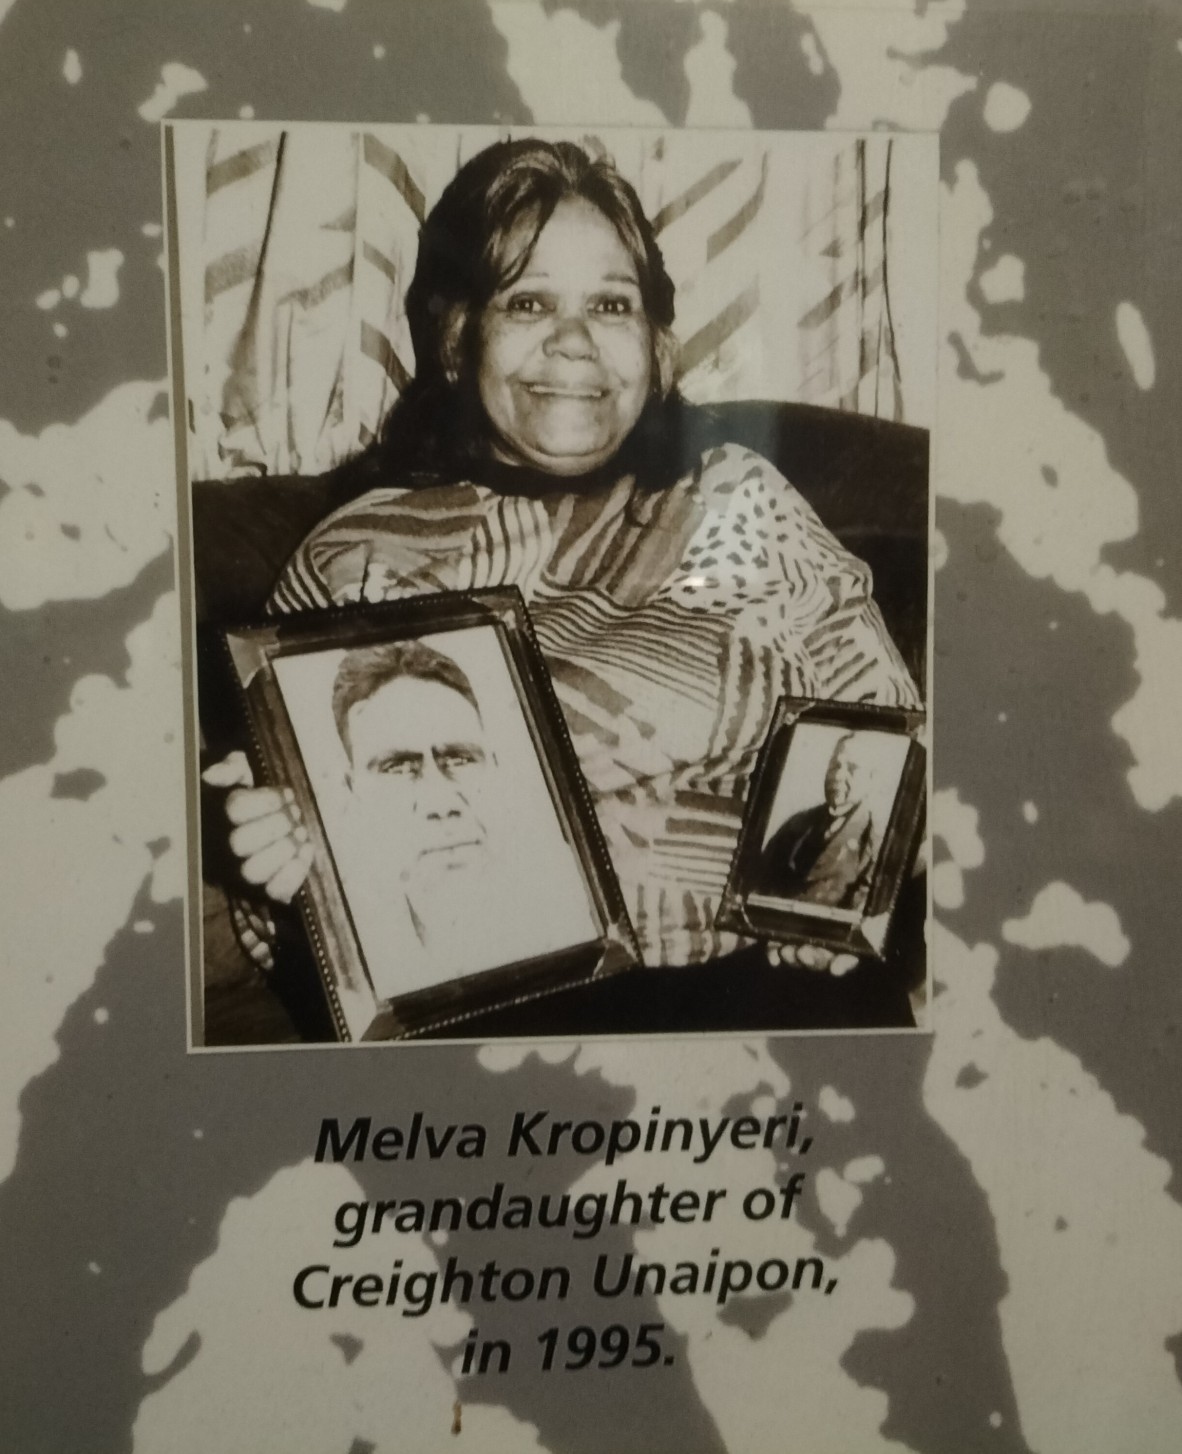 Aunty Elaine Kropinyeri's mother Melva is smiling and holding photographs of family members